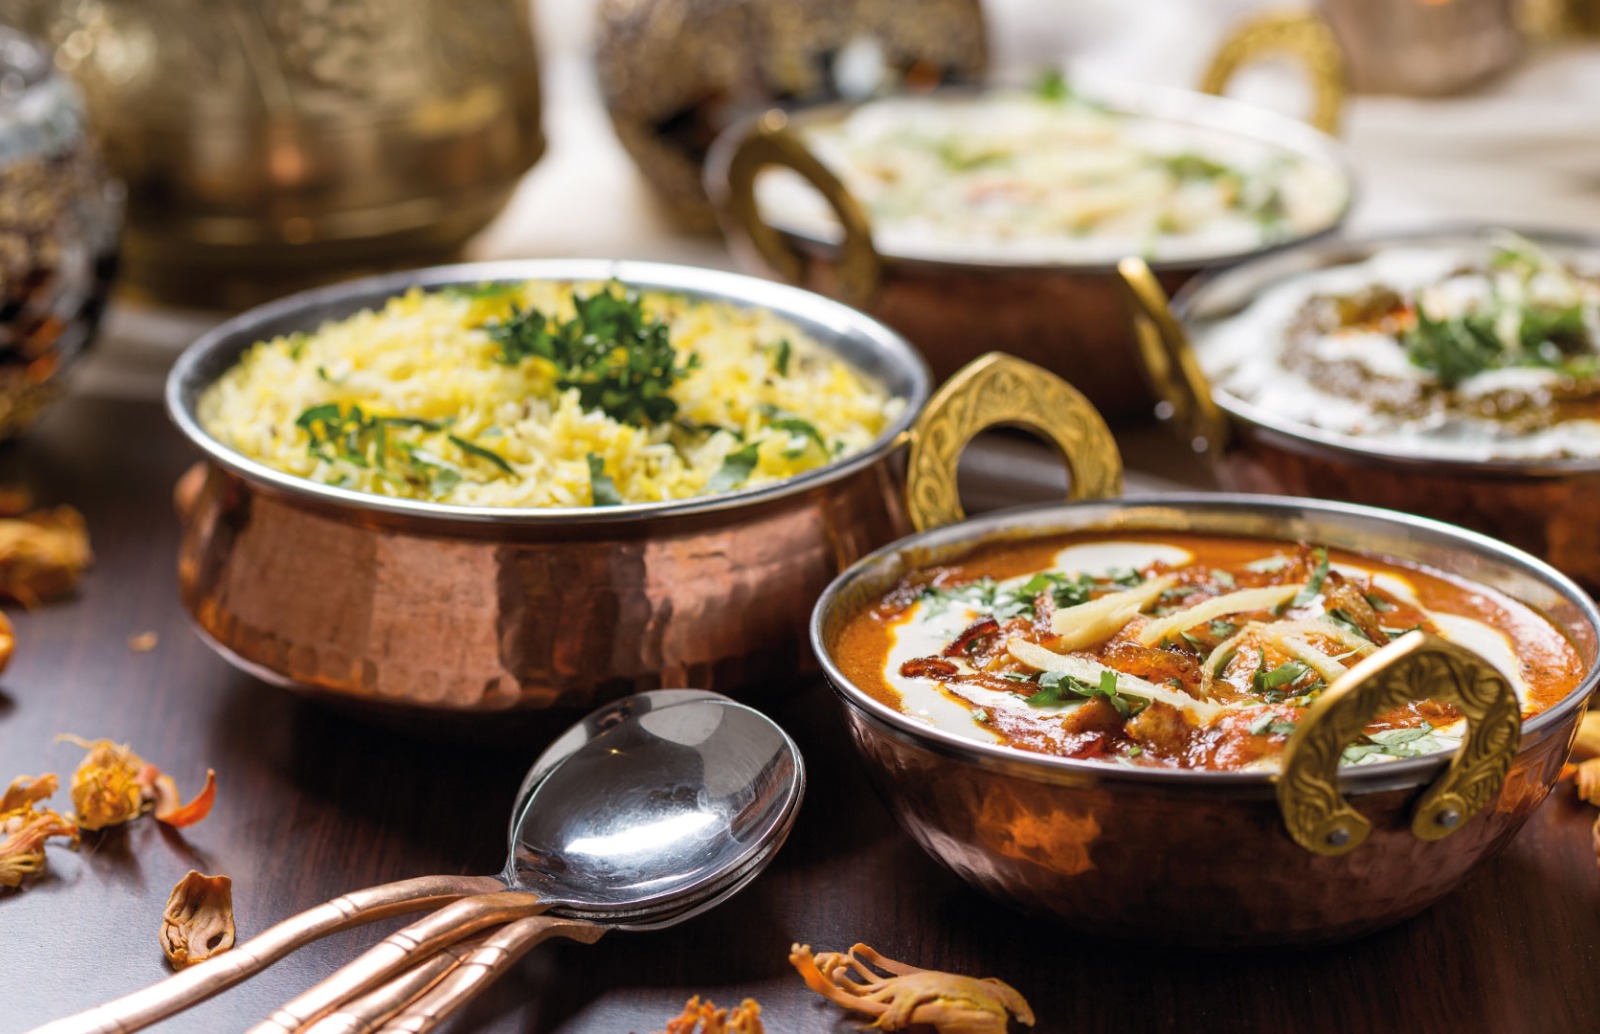 Metal bowls with various curries and rices in